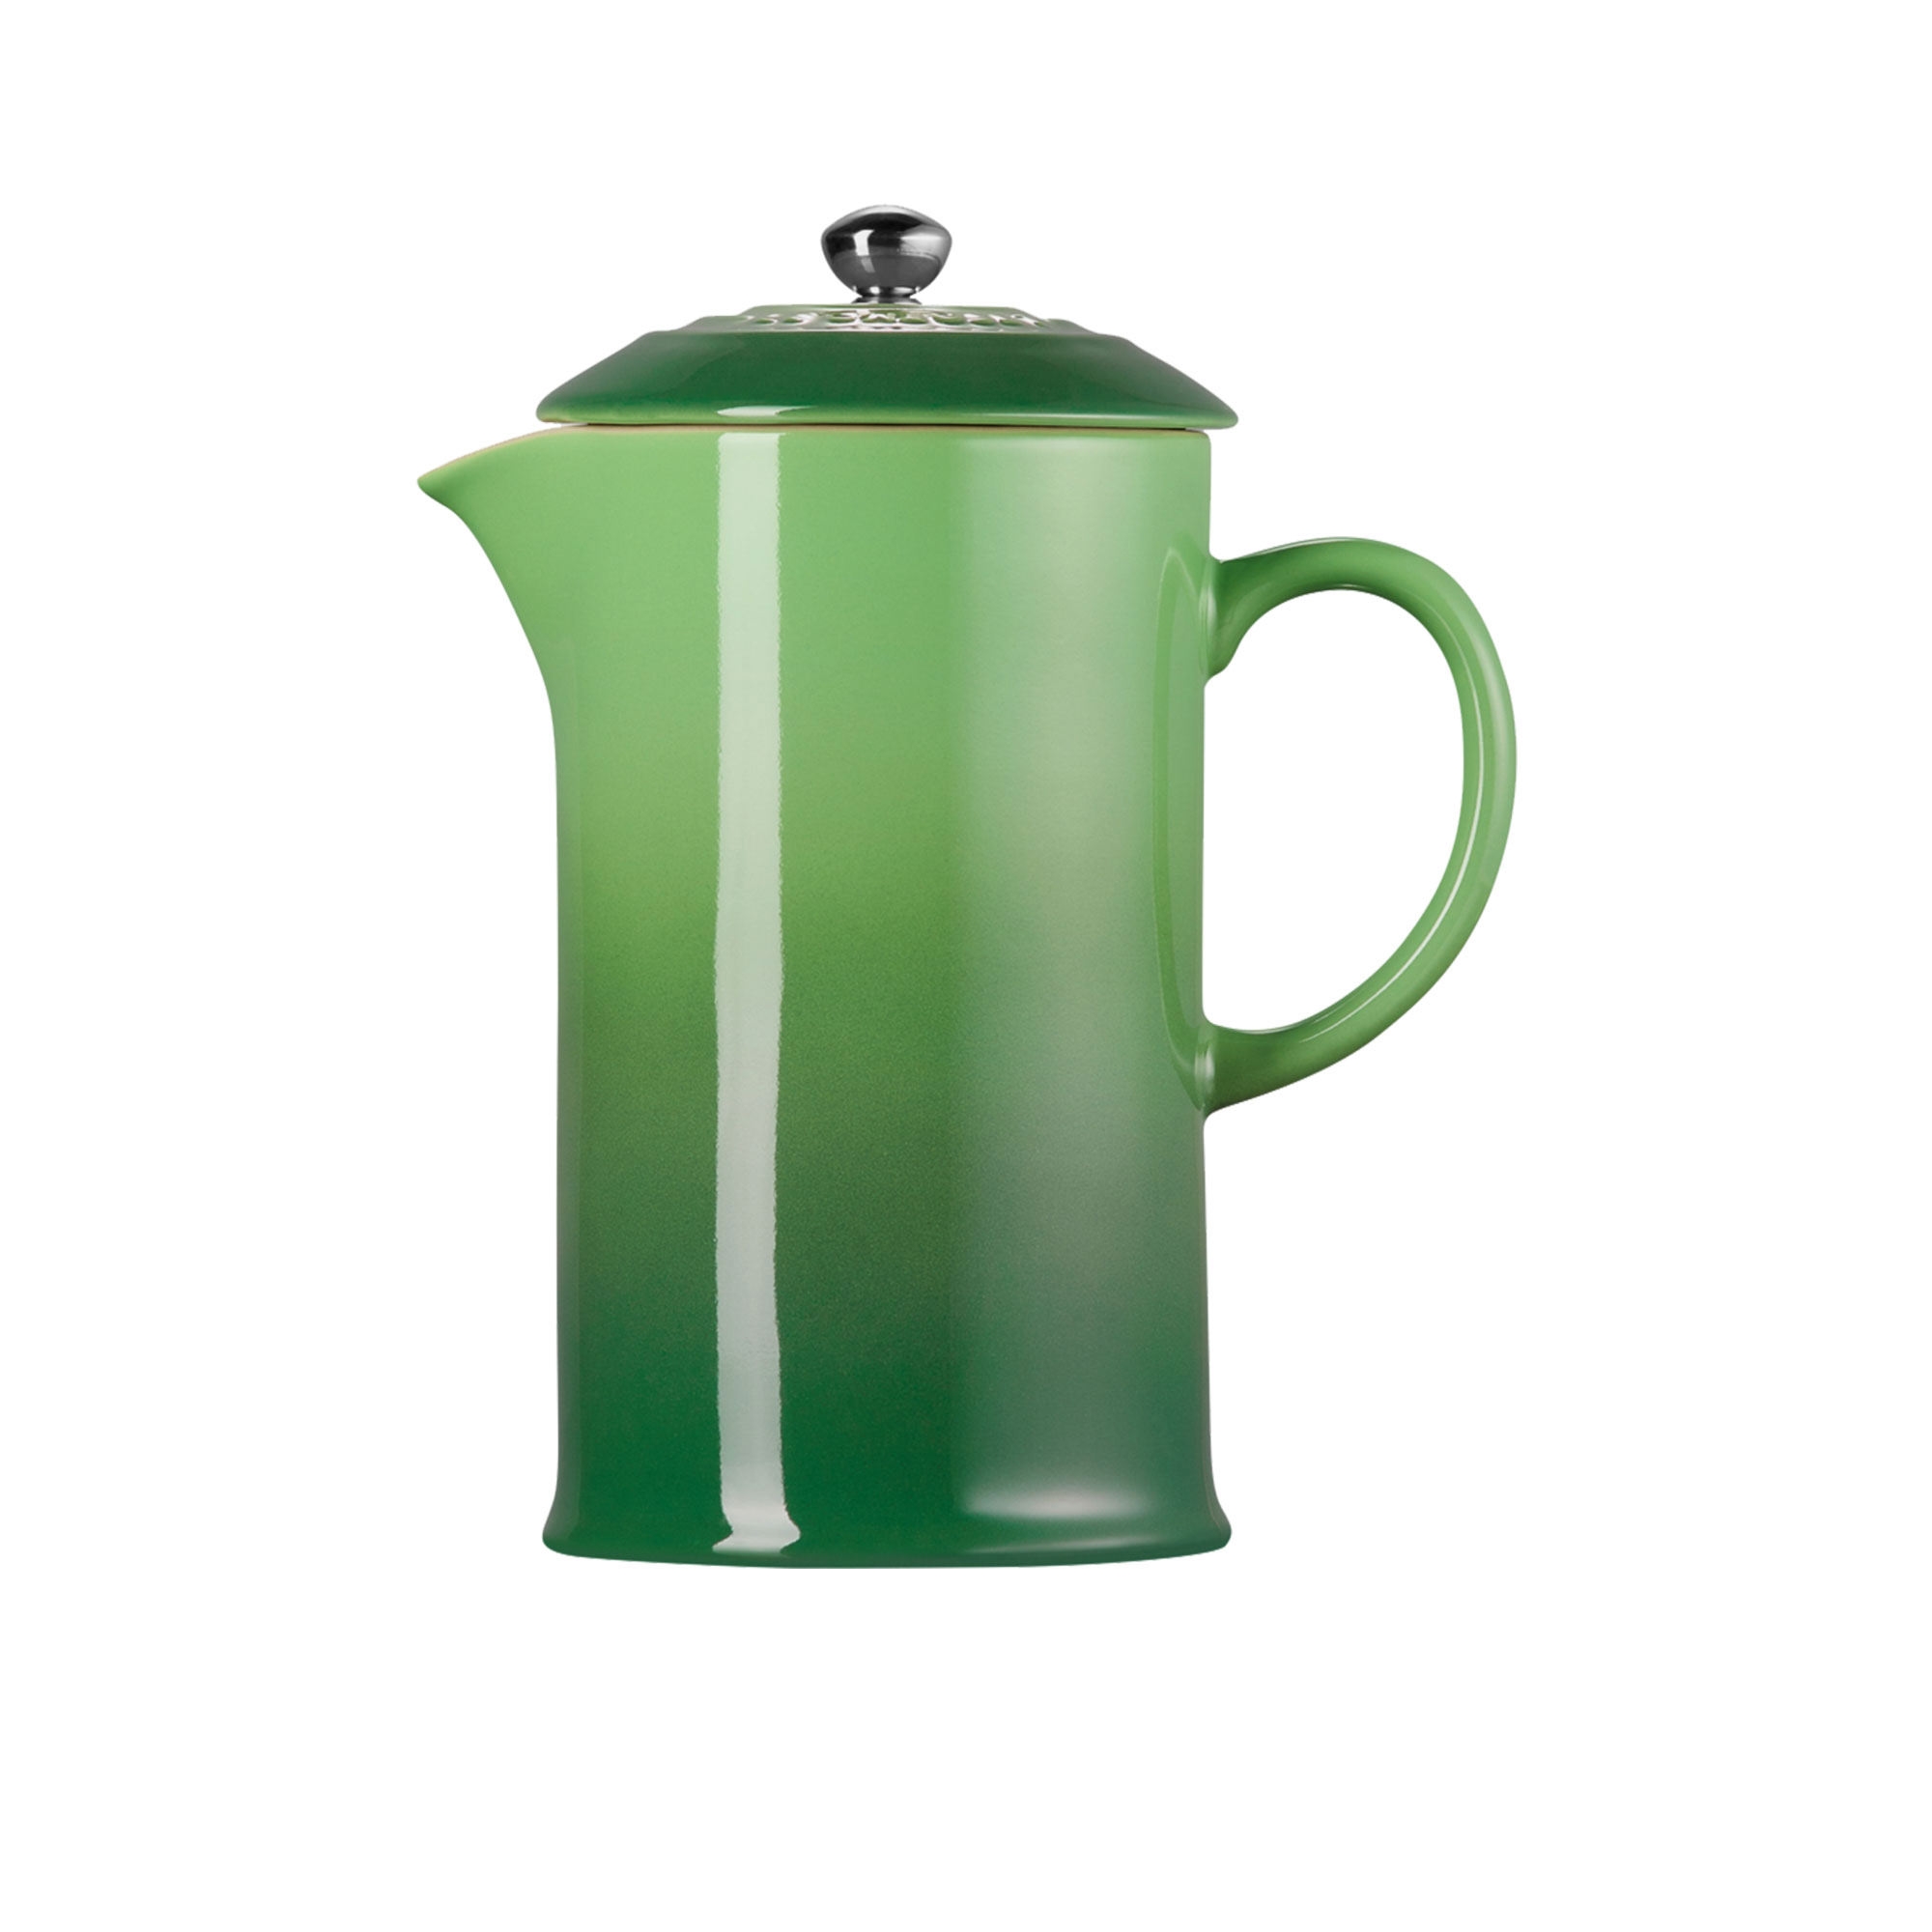 Le Creuset Stoneware French Press 800ml Bamboo Green Image 1